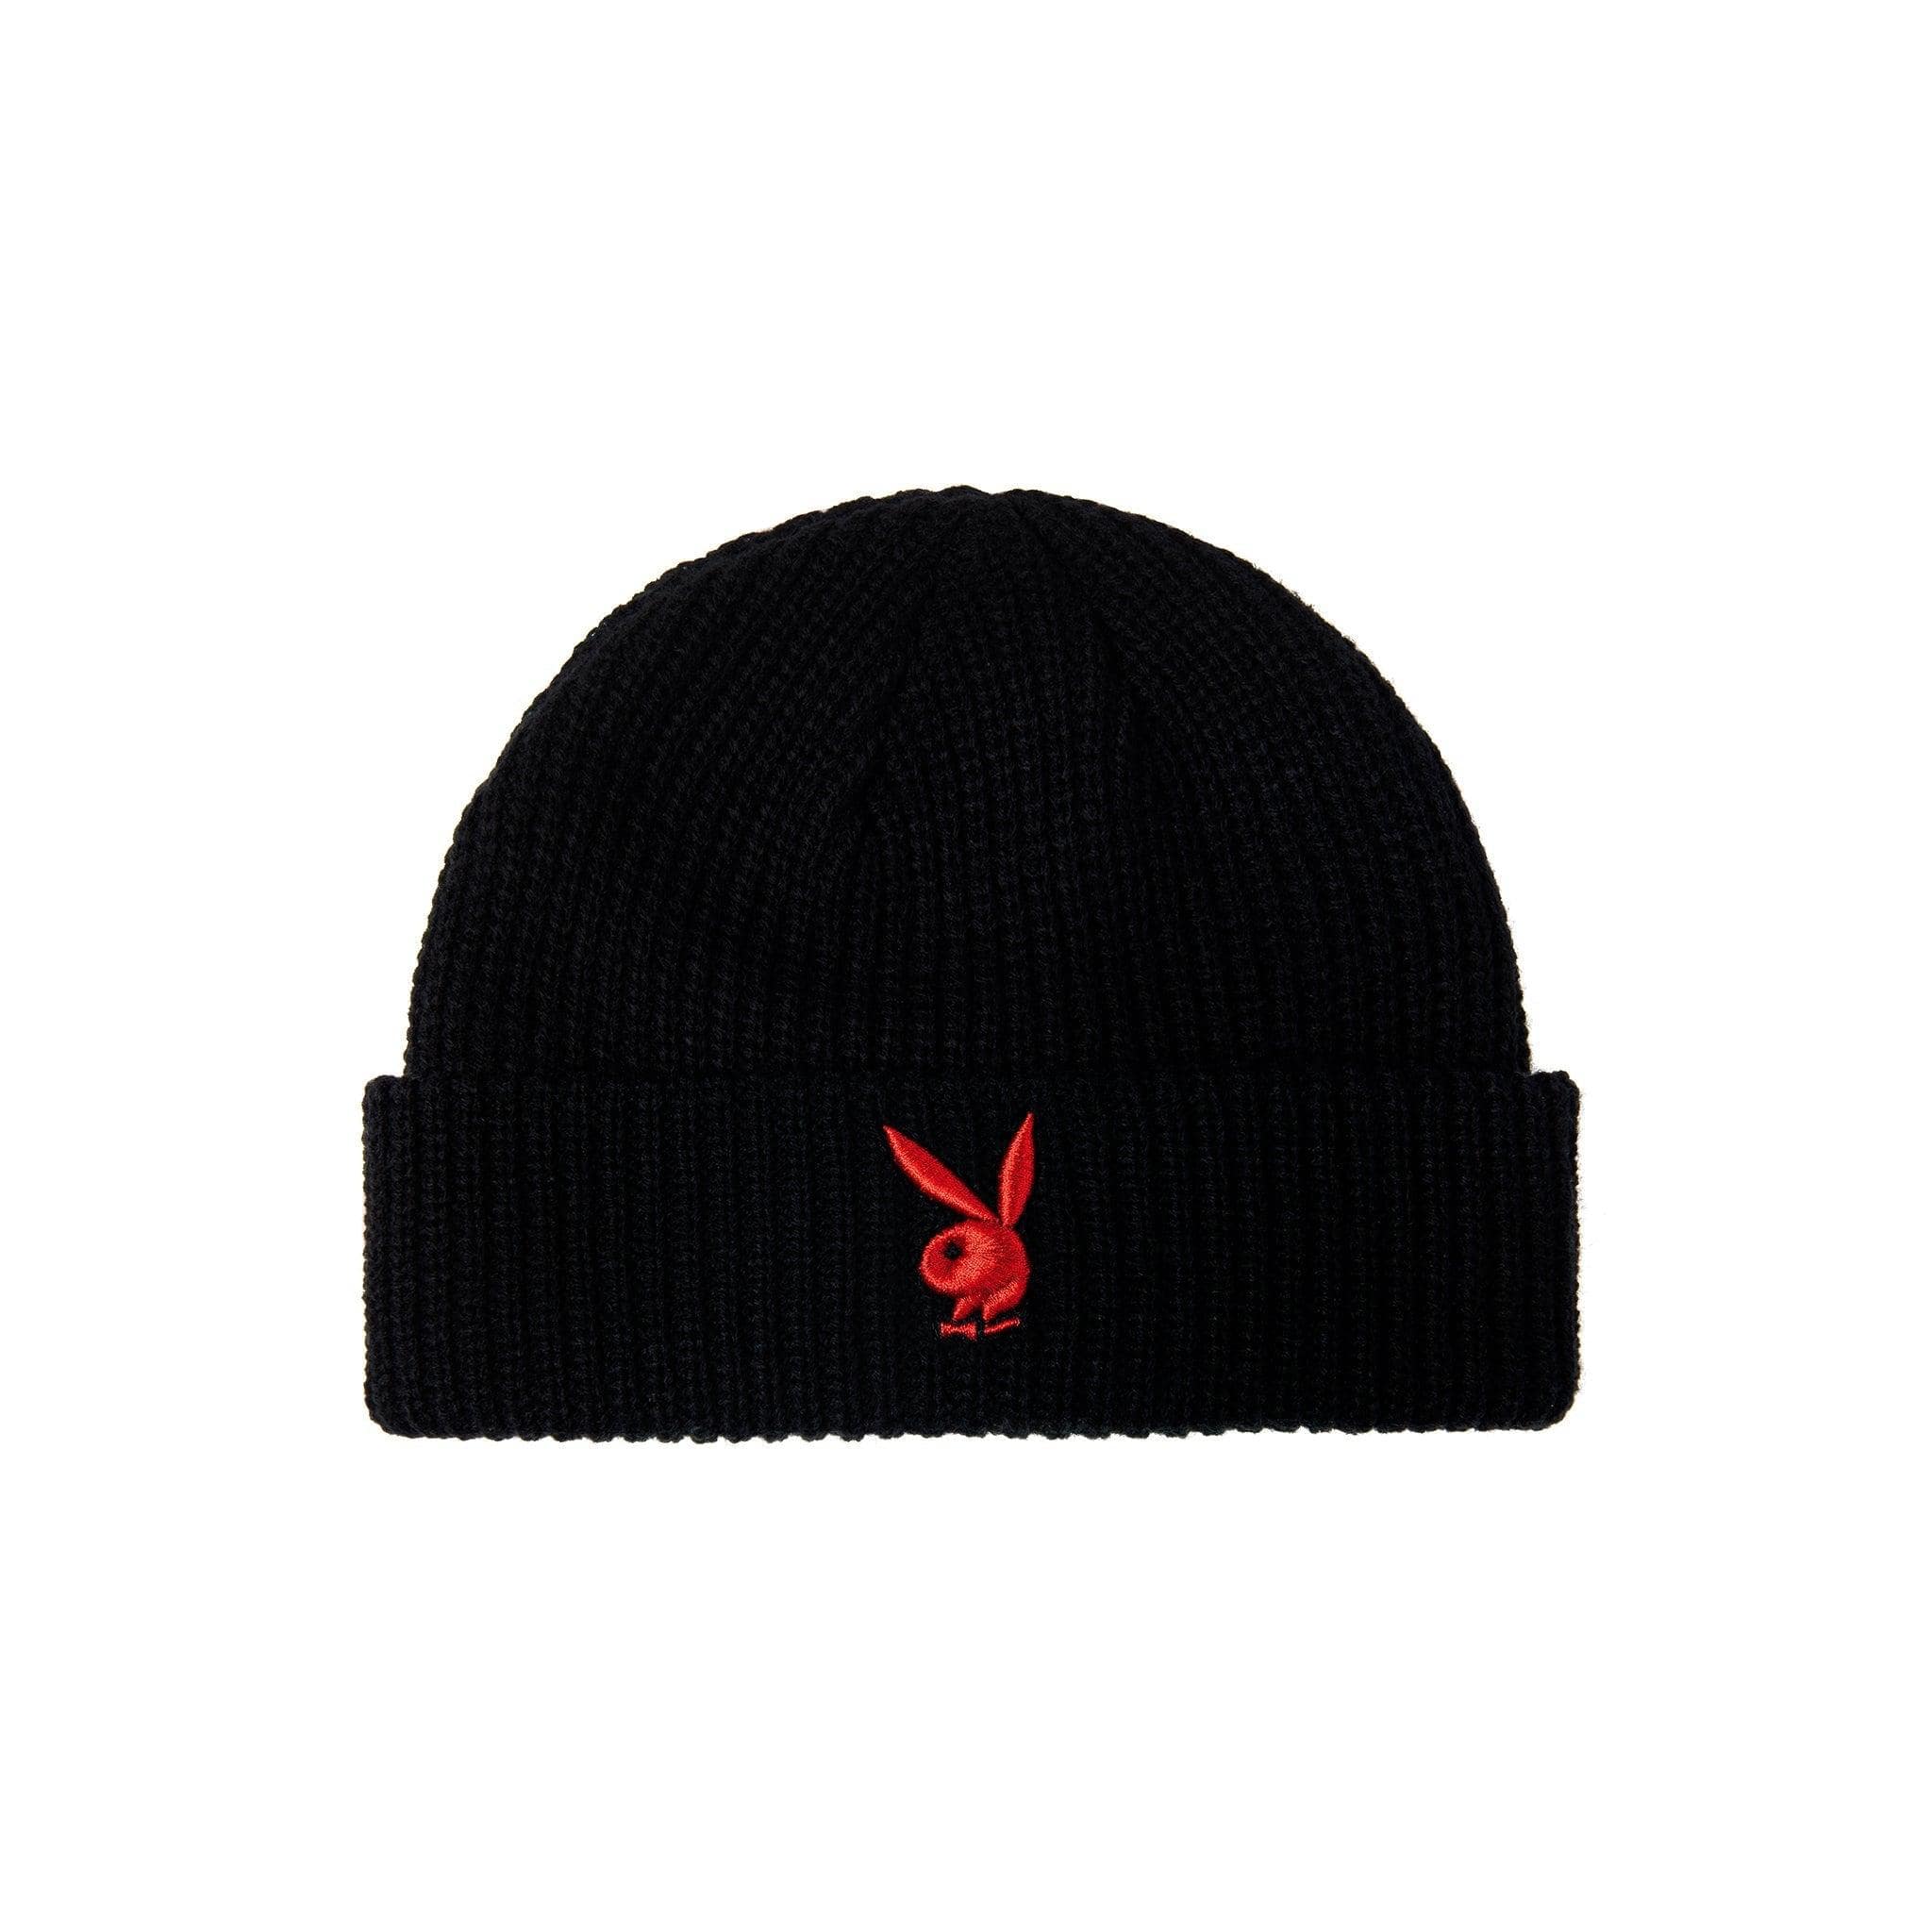 Rabbit Head Knit Beanie Black With Red Bunny